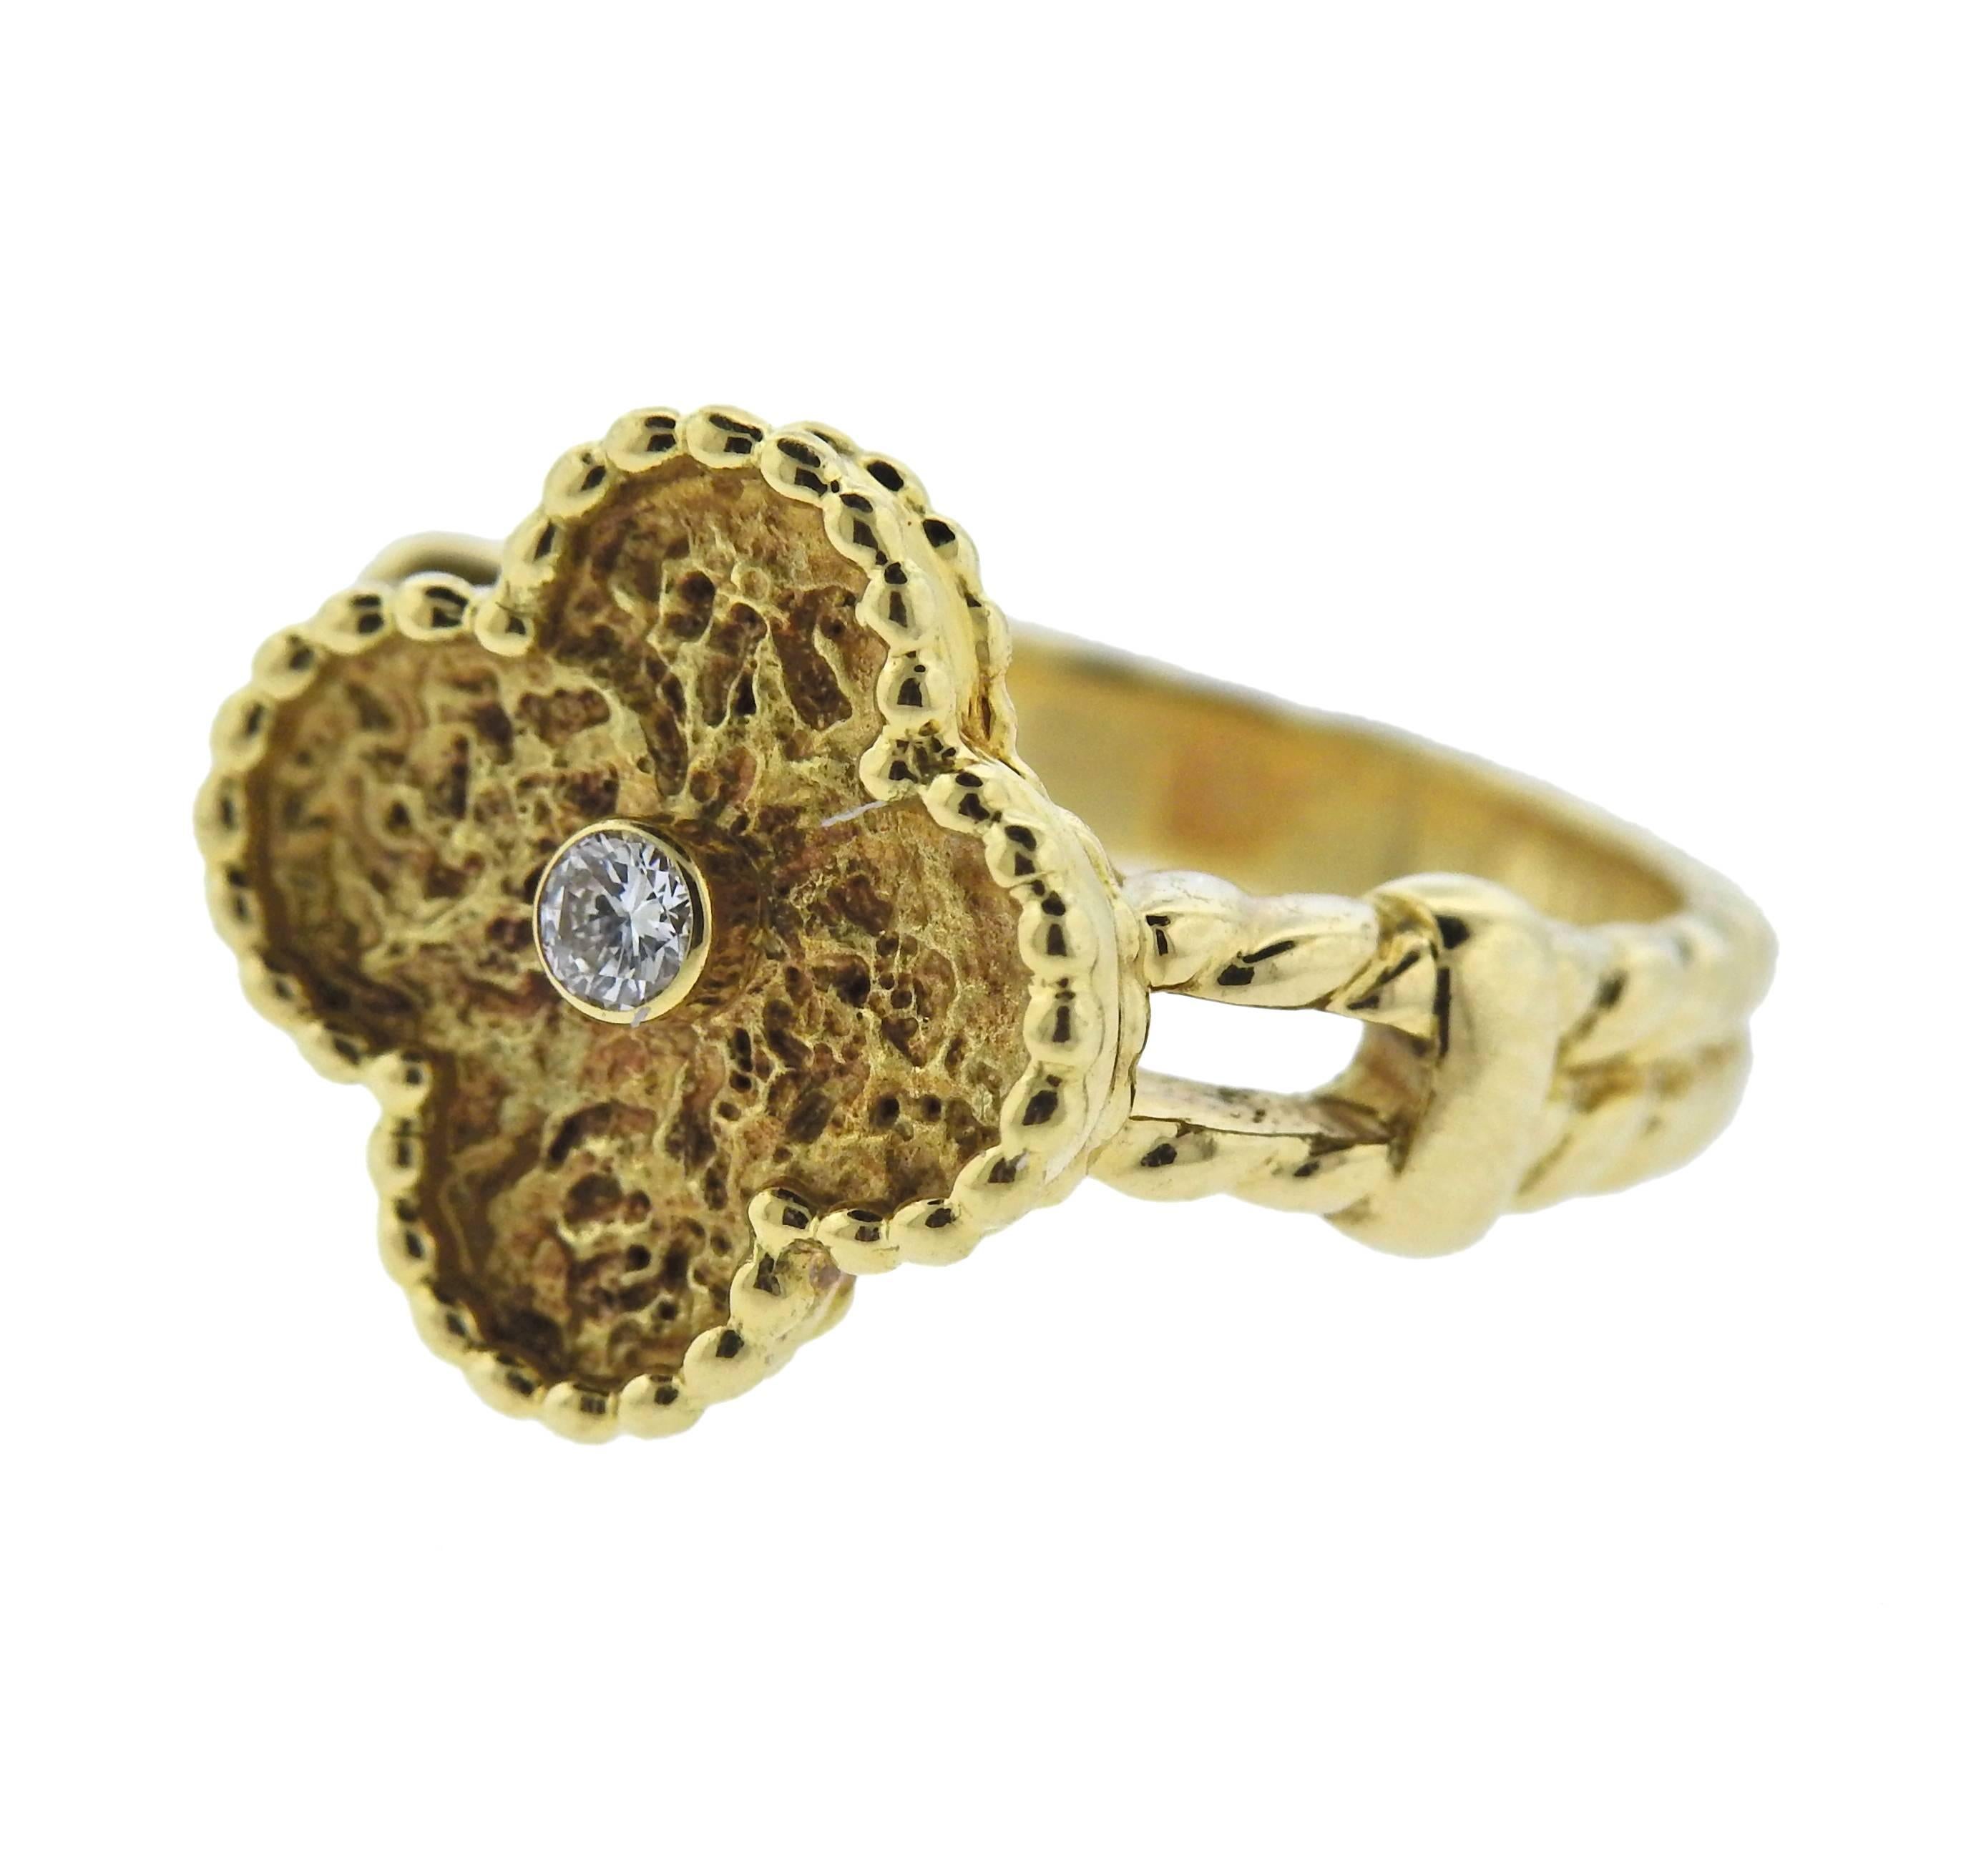 18k gold Van Cleef & Arpels vintage alhambra ring featuring 1 F-G/VVS diamond measuring approximately 0.06ct, Ring size 5.5, motif measures 15mm X 15mm. Weight is 7.5 grams, marked VCA, 750, AL0500YG***.